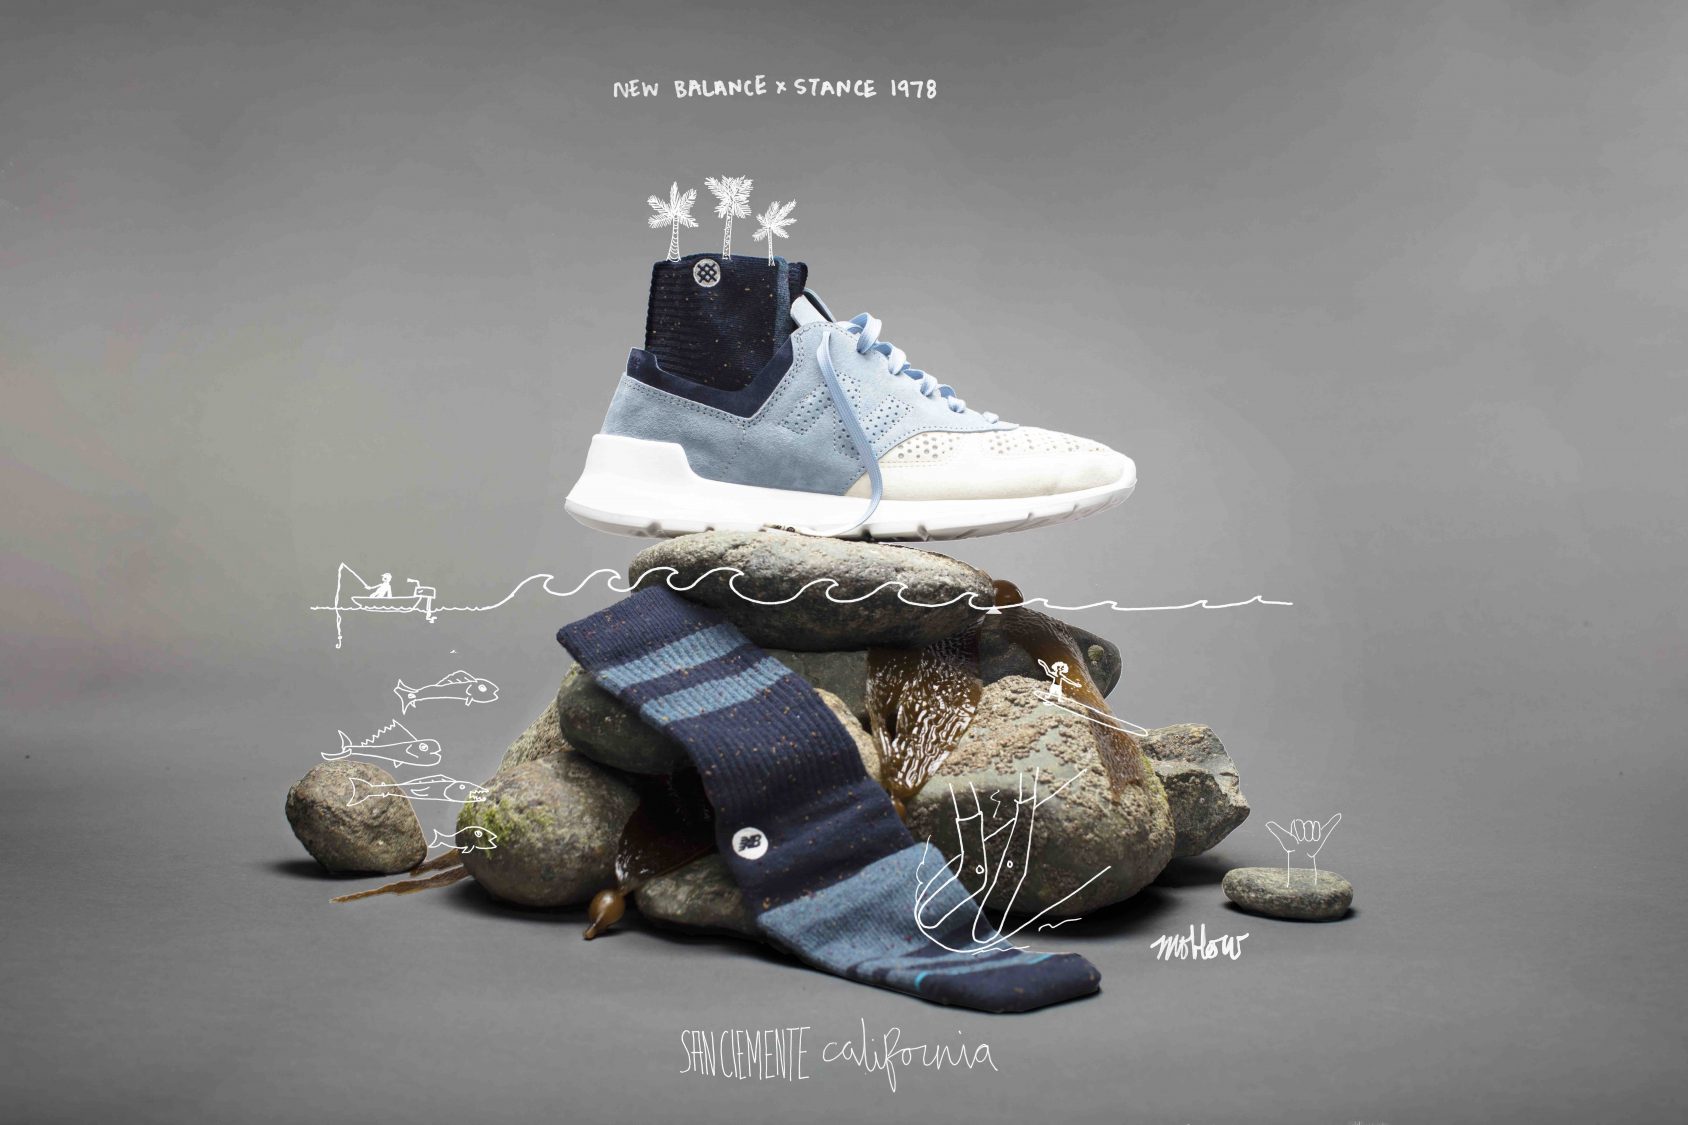 New Balance STANCE socks lappoms lifestyle blog collab capsule collection